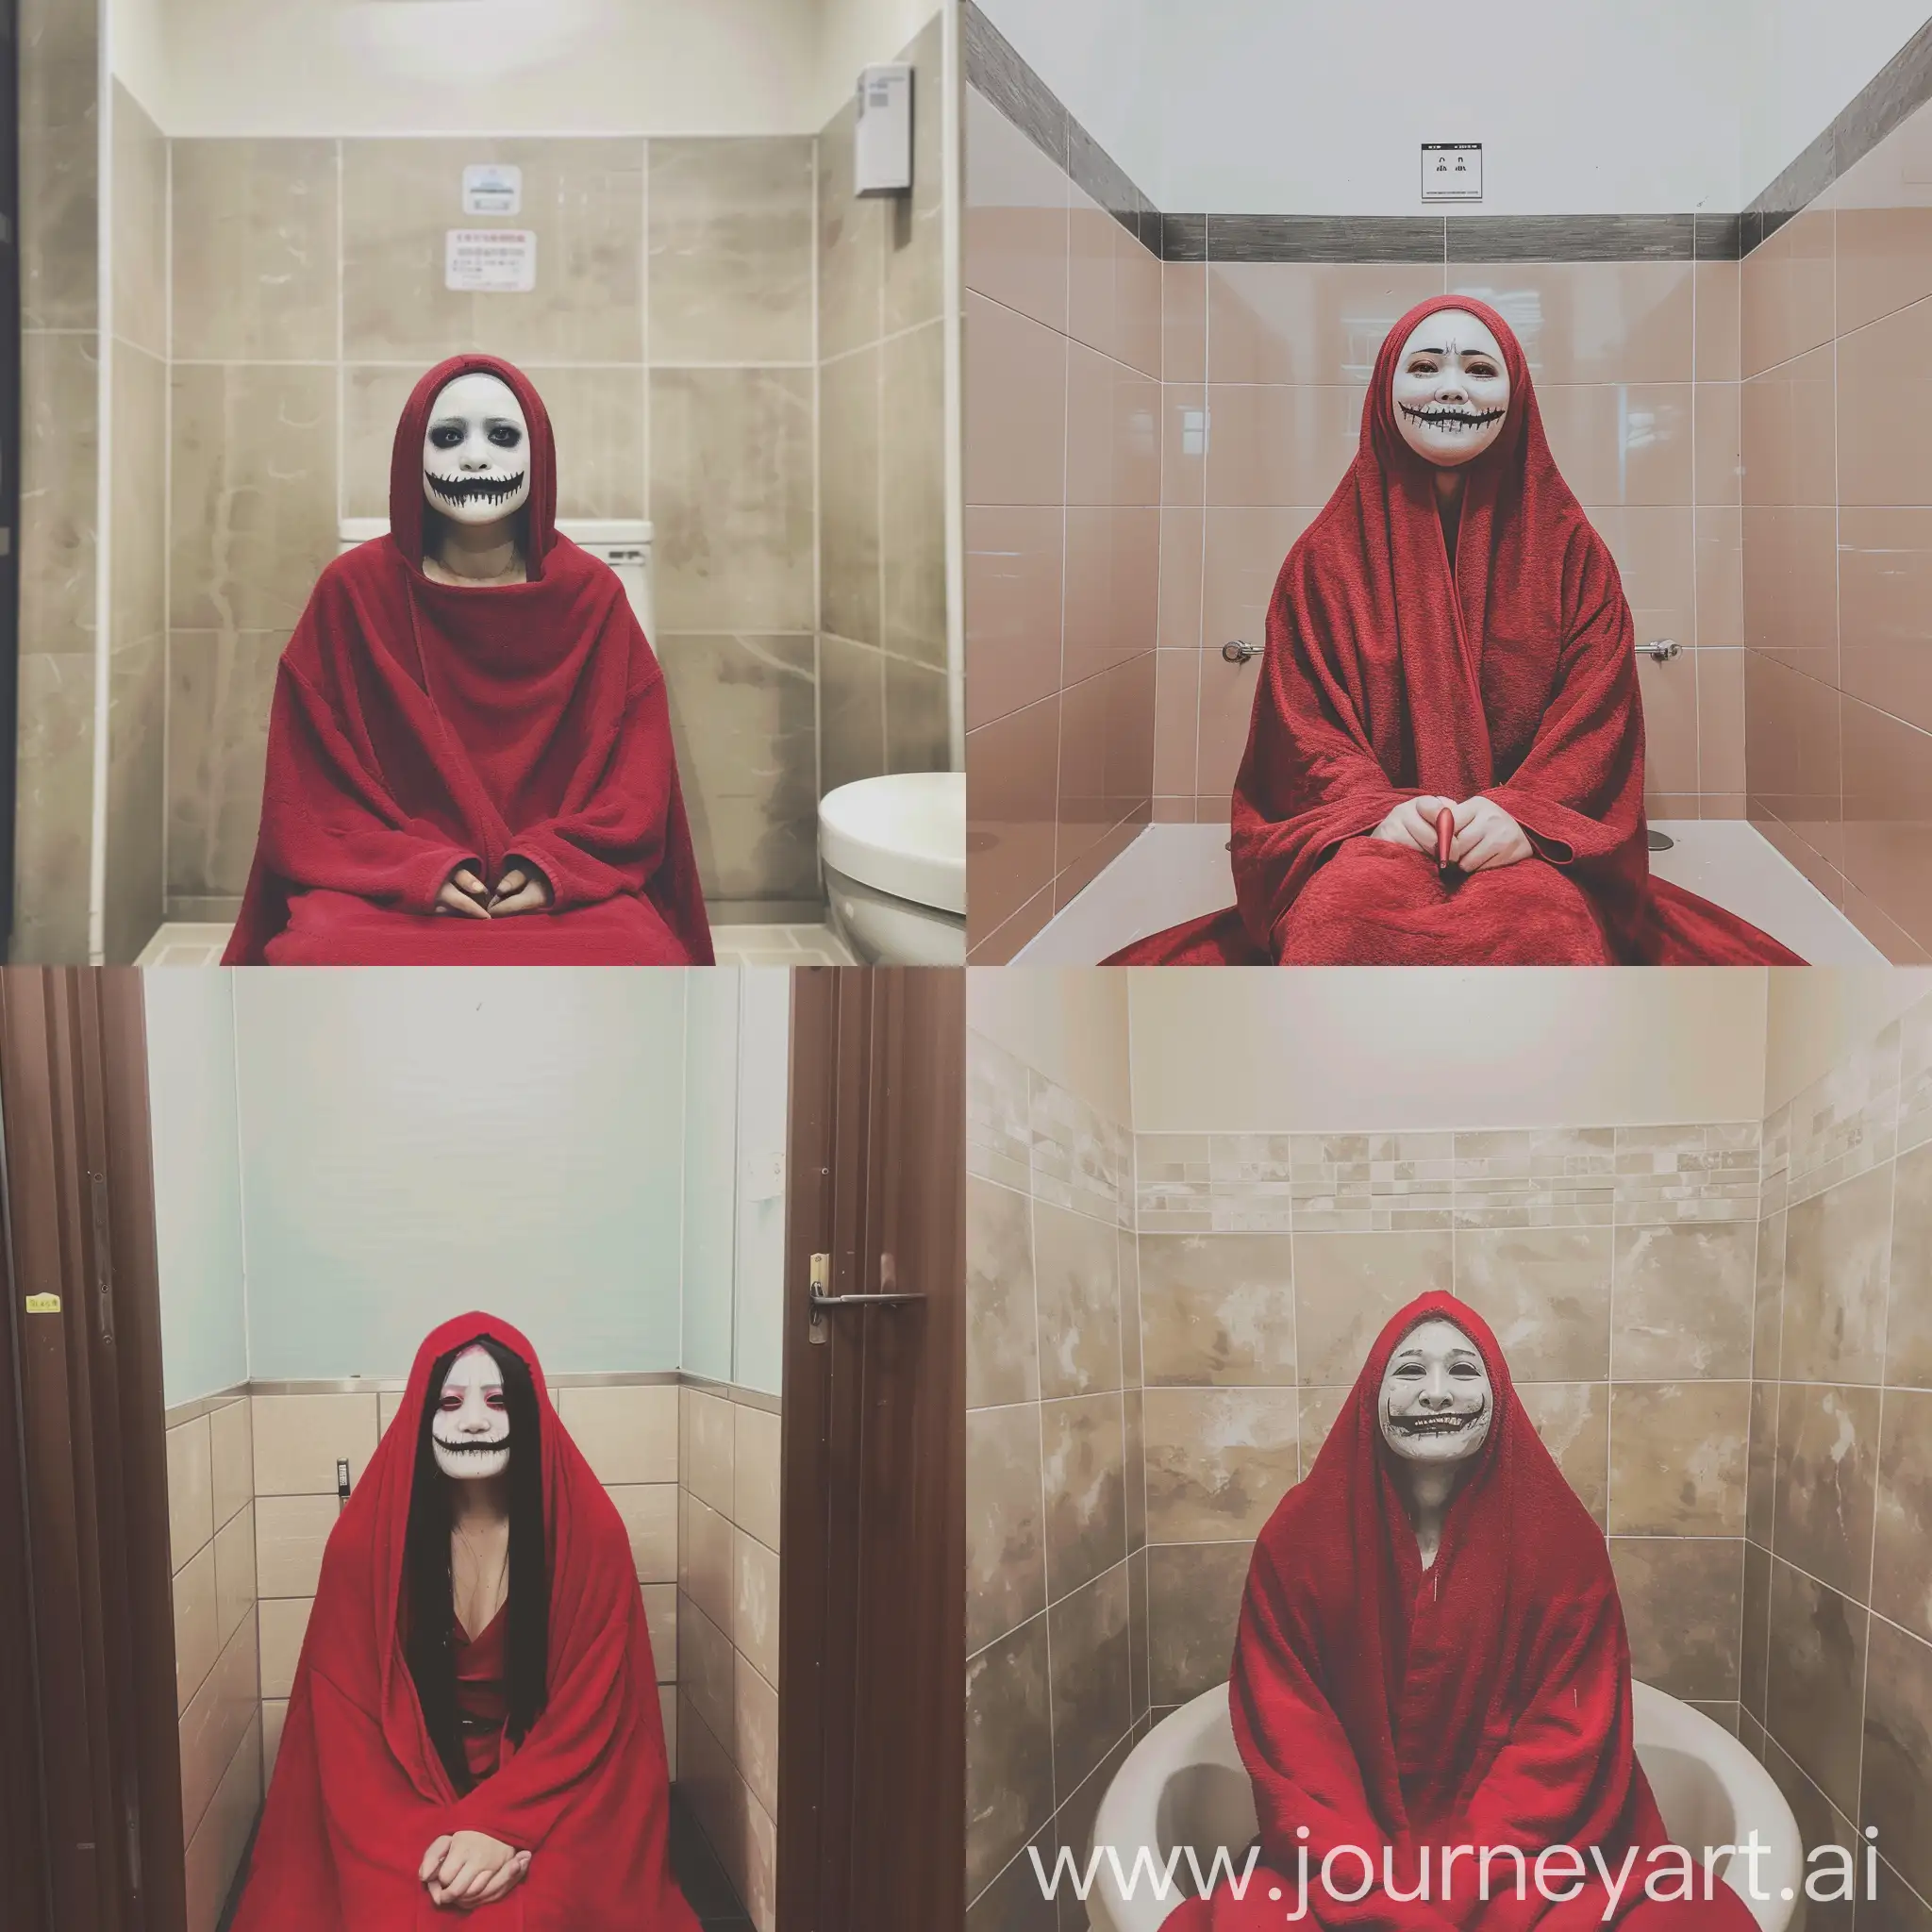 Ethereal-Japanese-Folklore-Figure-in-Red-Cloak-Enigmatic-Bathroom-Presence